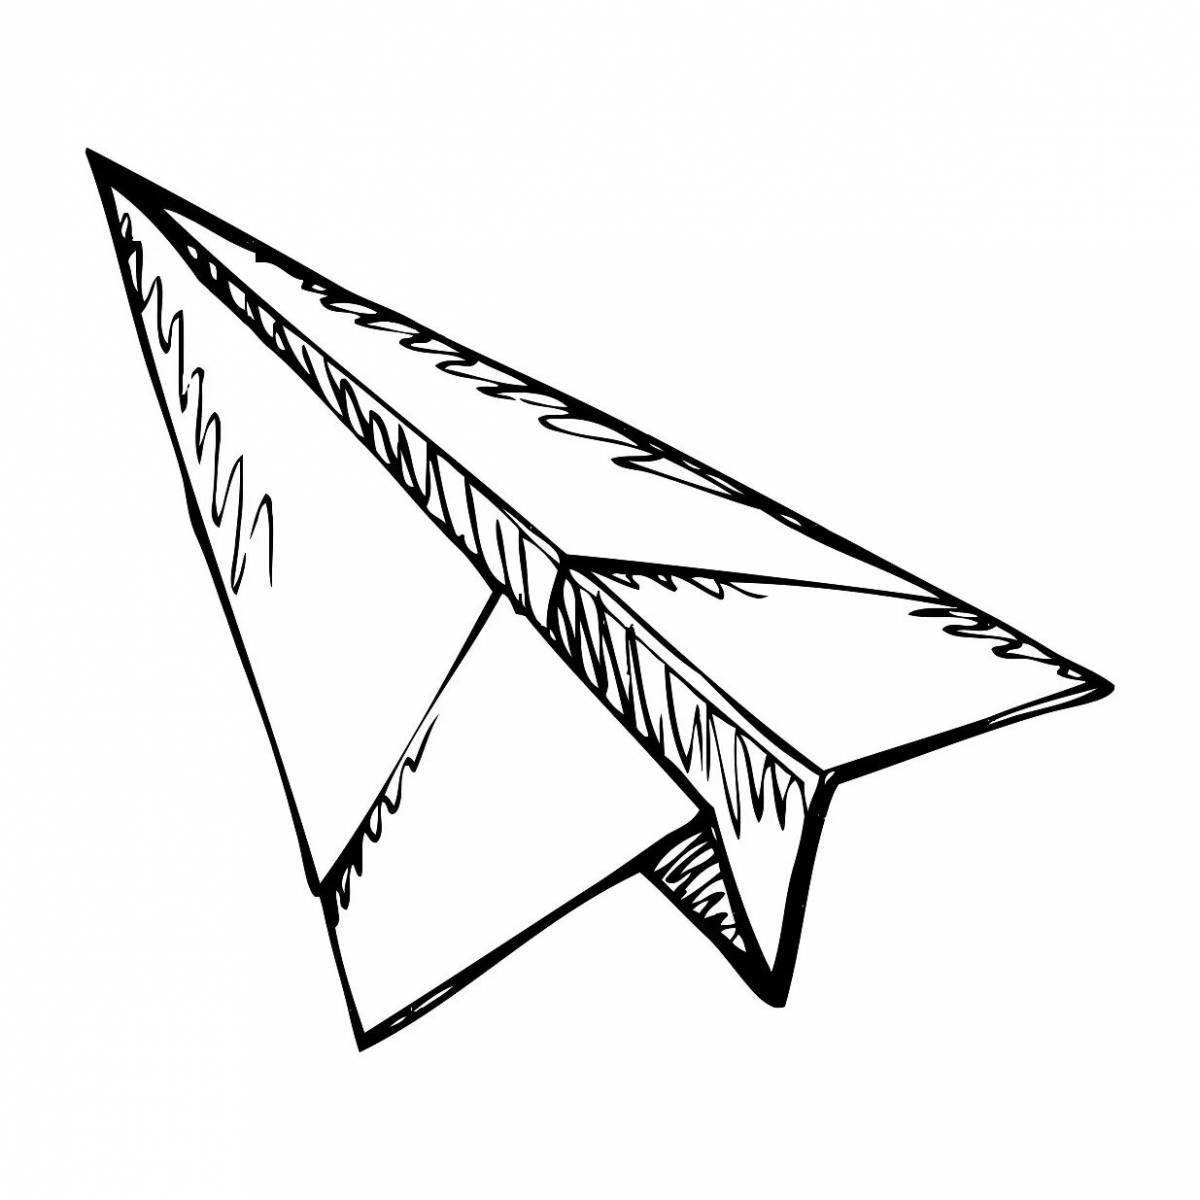 Colored paper airplane coloring book